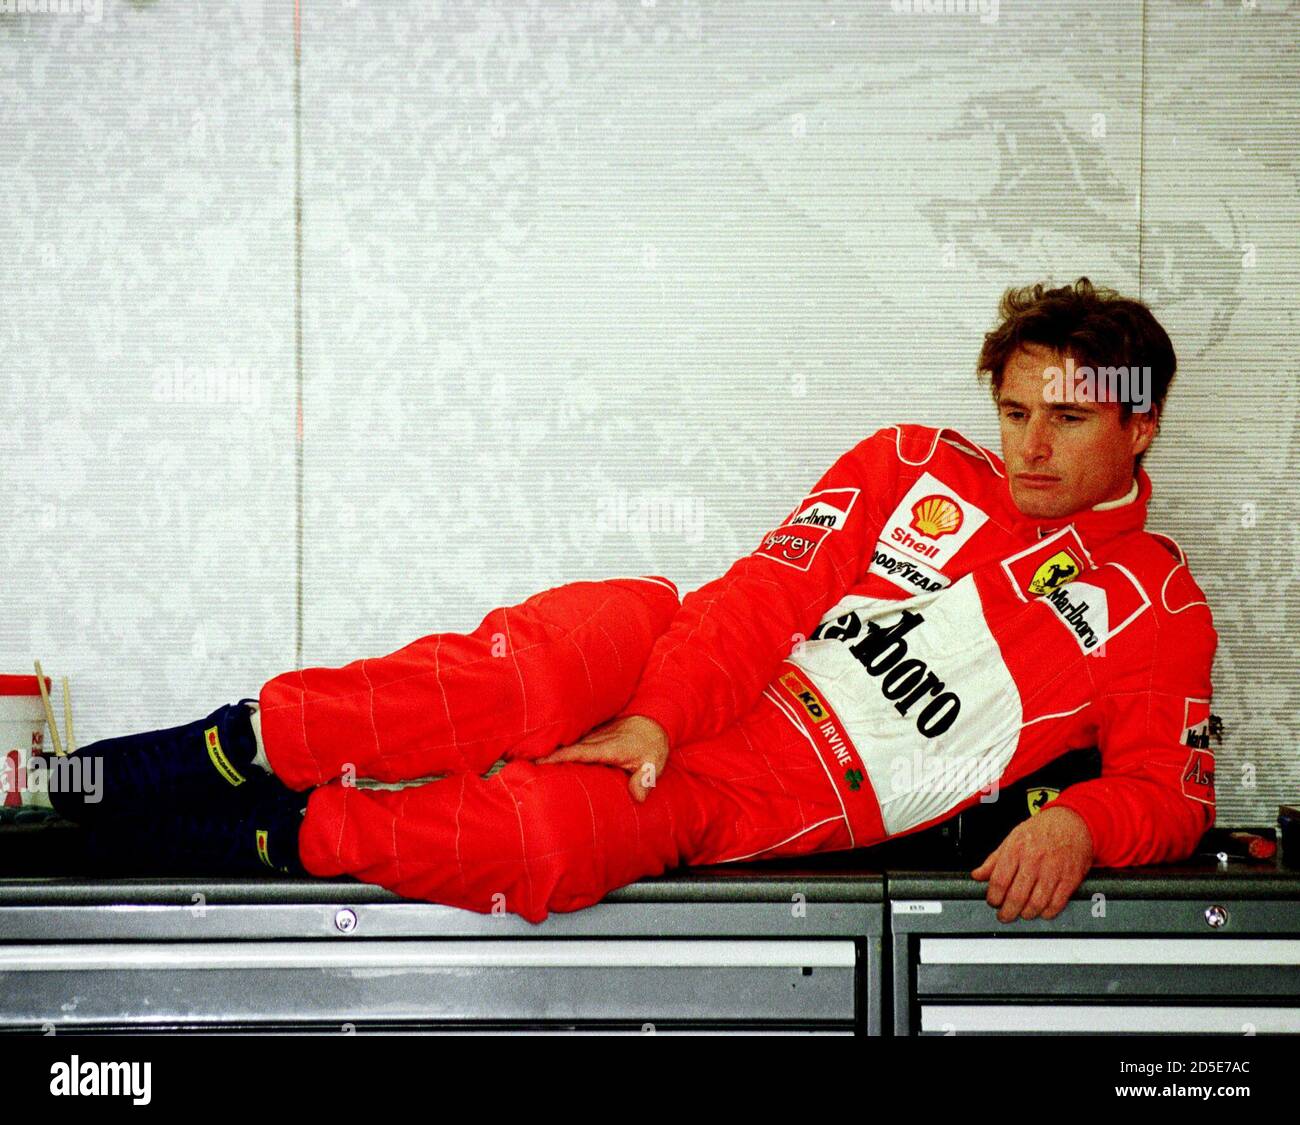 irish-driver-eddie-irvine-rests-in-his-teams-pit-during-a-break-in-testing-at-the-jerez-racetrack-january-13-several-teams-are-testing-their-new-cars-ahead-of-the-start-of-the-1998-formula-one-season-sport-motor-racing-2D5E7AC.jpg